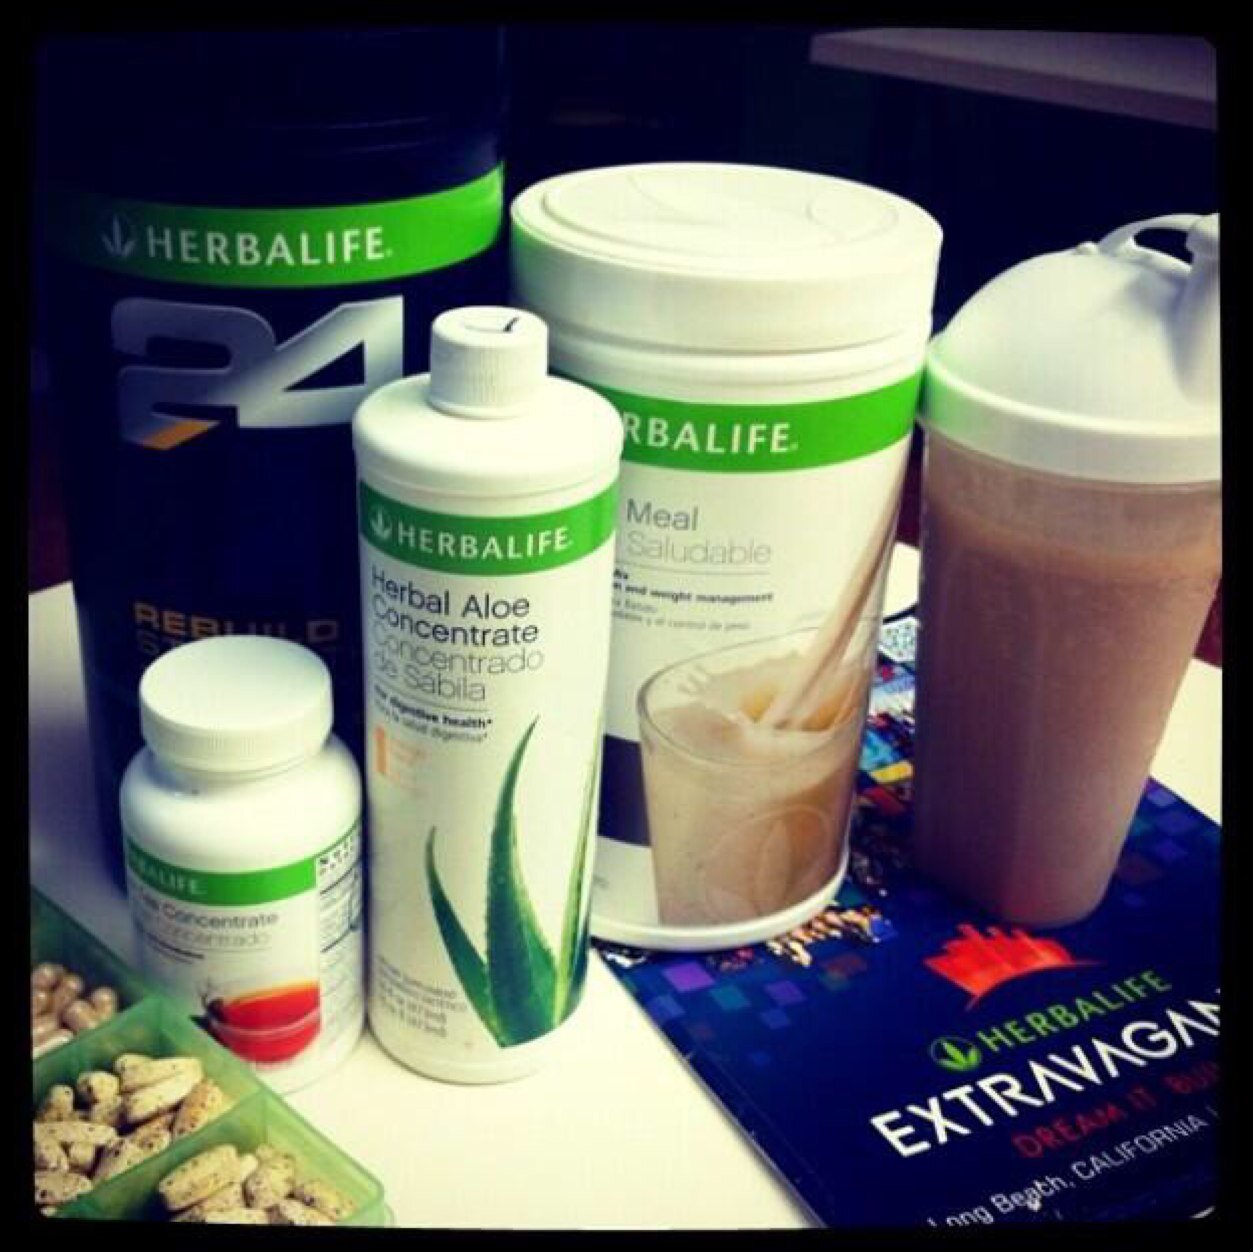 Official Herbalife Distributor & Wellness Coach.